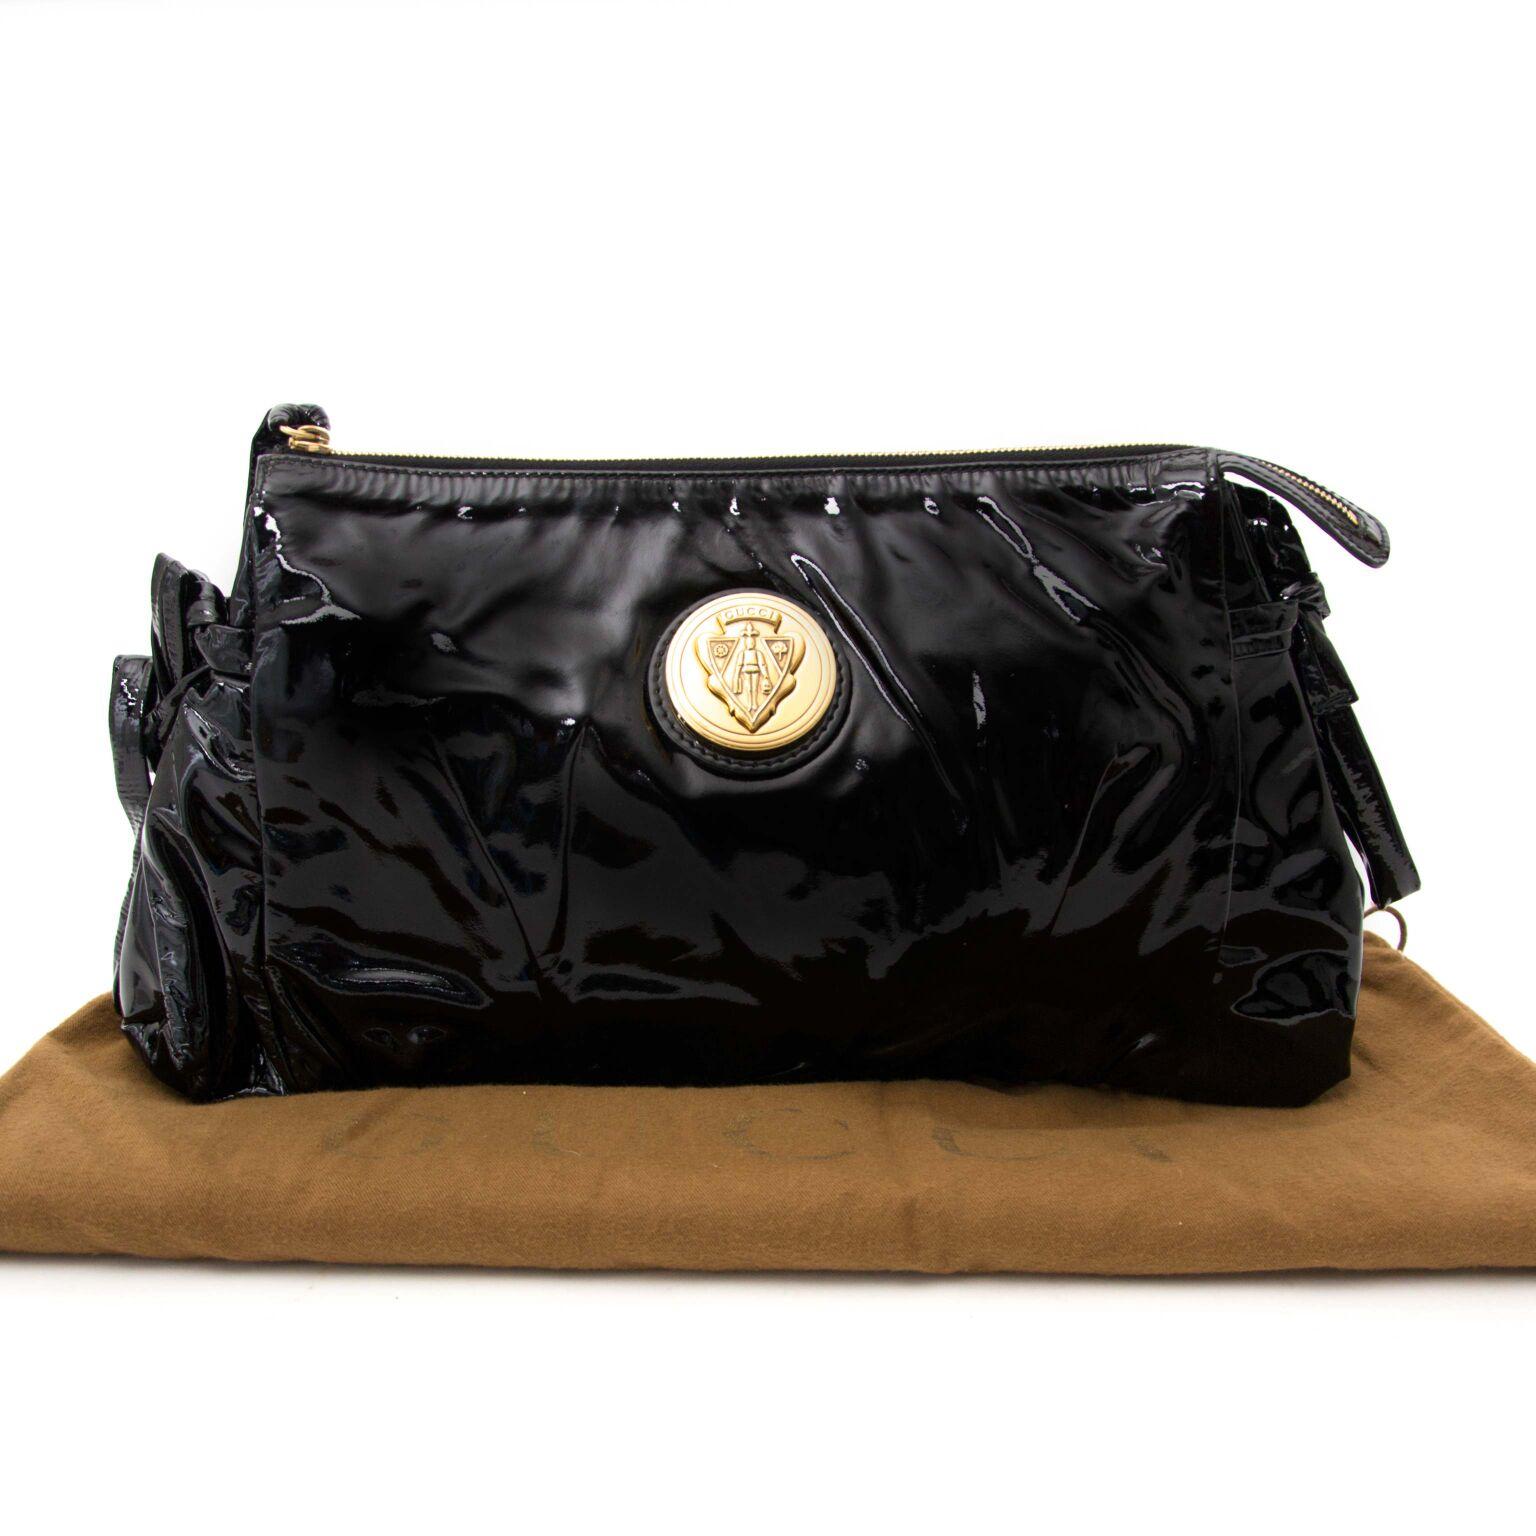 In excellent condition

 Gucci Black Patent Leather Clutch

This shiny black clutch is big enough for all your personal belongings. The gold-toned hardware gives the bag an exclusive look.

Comes with:

booklet
dust bag